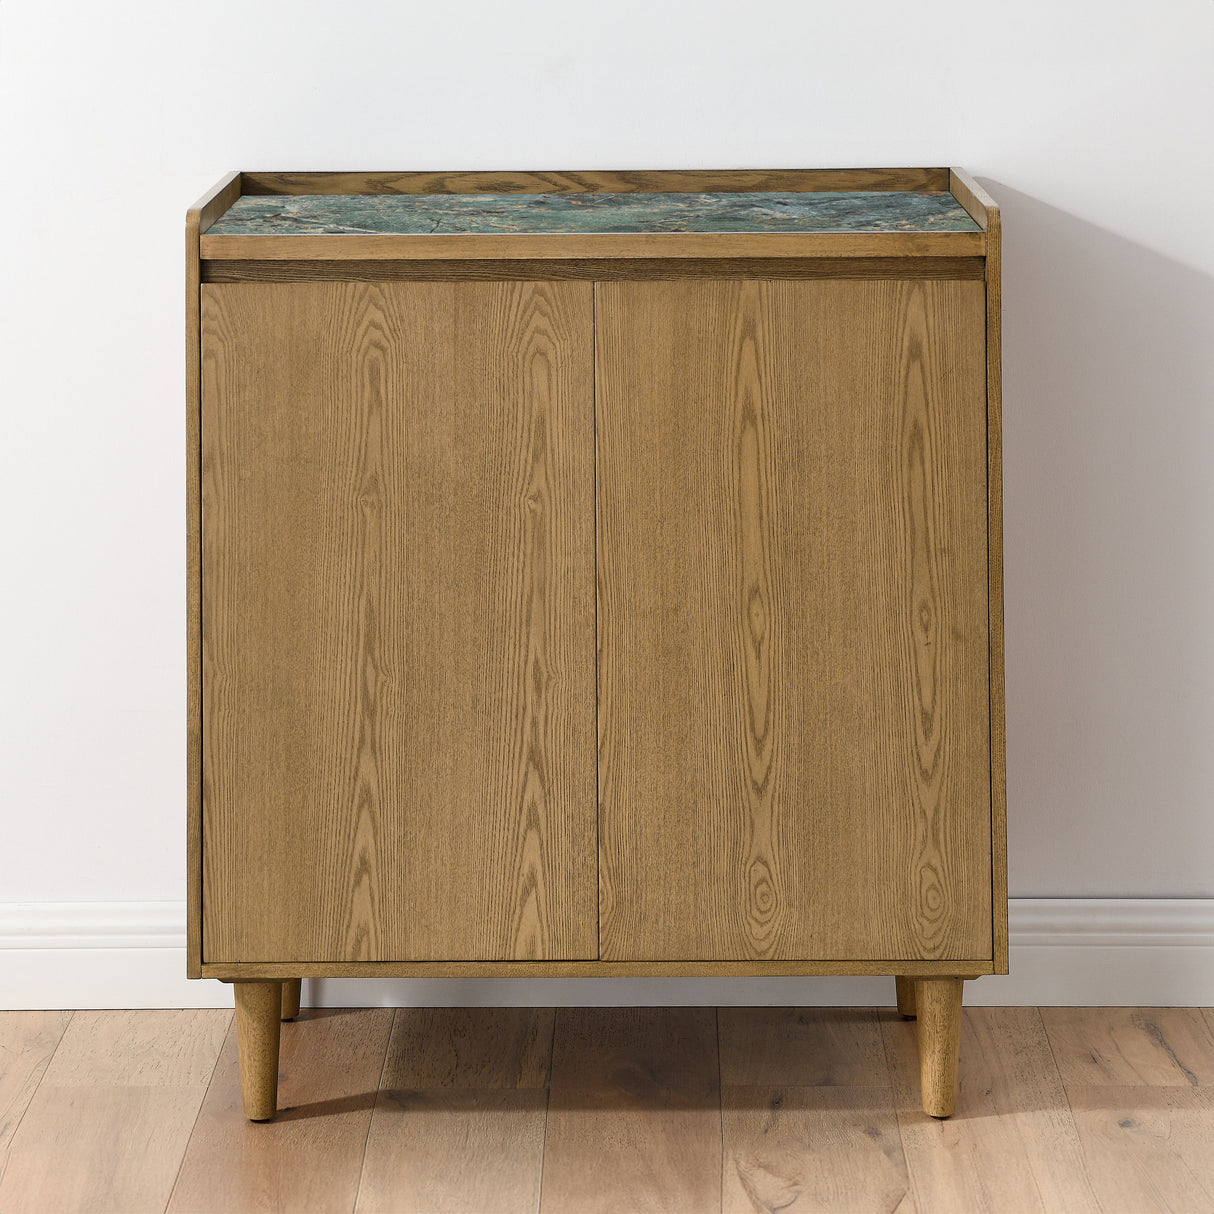 Novato - Bar Cabinet With Sintered Stone Inlay Top - Light Brown